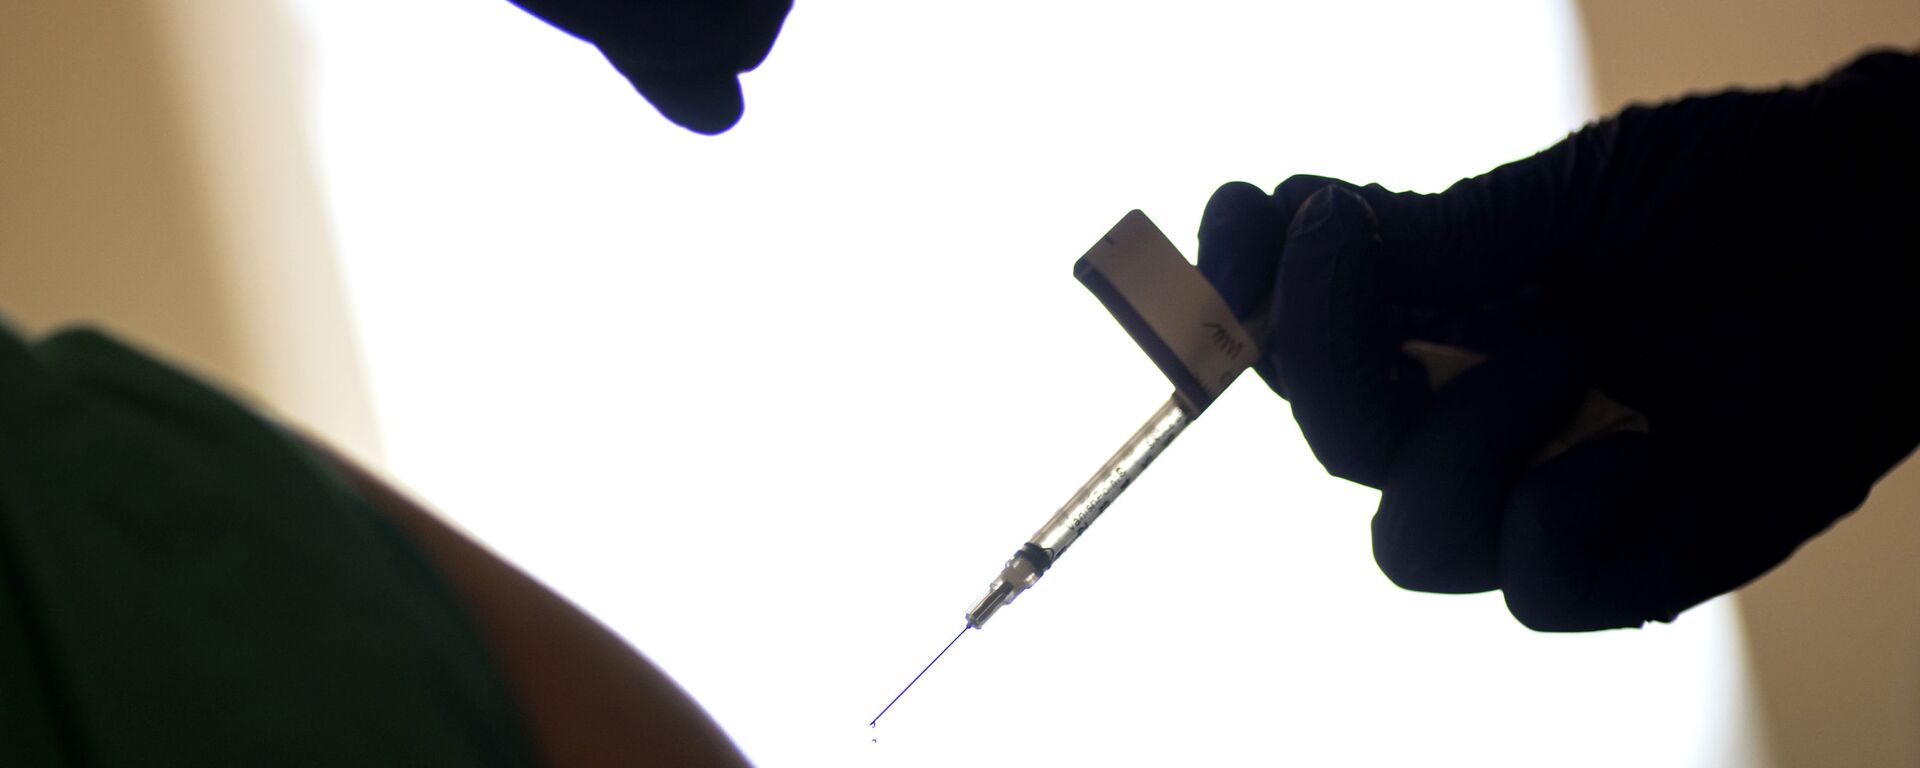 In this Tuesday, 15 December 2020 file photo, a droplet falls from a syringe after a health care worker was injected with the Pfizer-BioNTech COVID-19 vaccine at a hospital in Providence, R.I. - Sputnik International, 1920, 03.08.2021